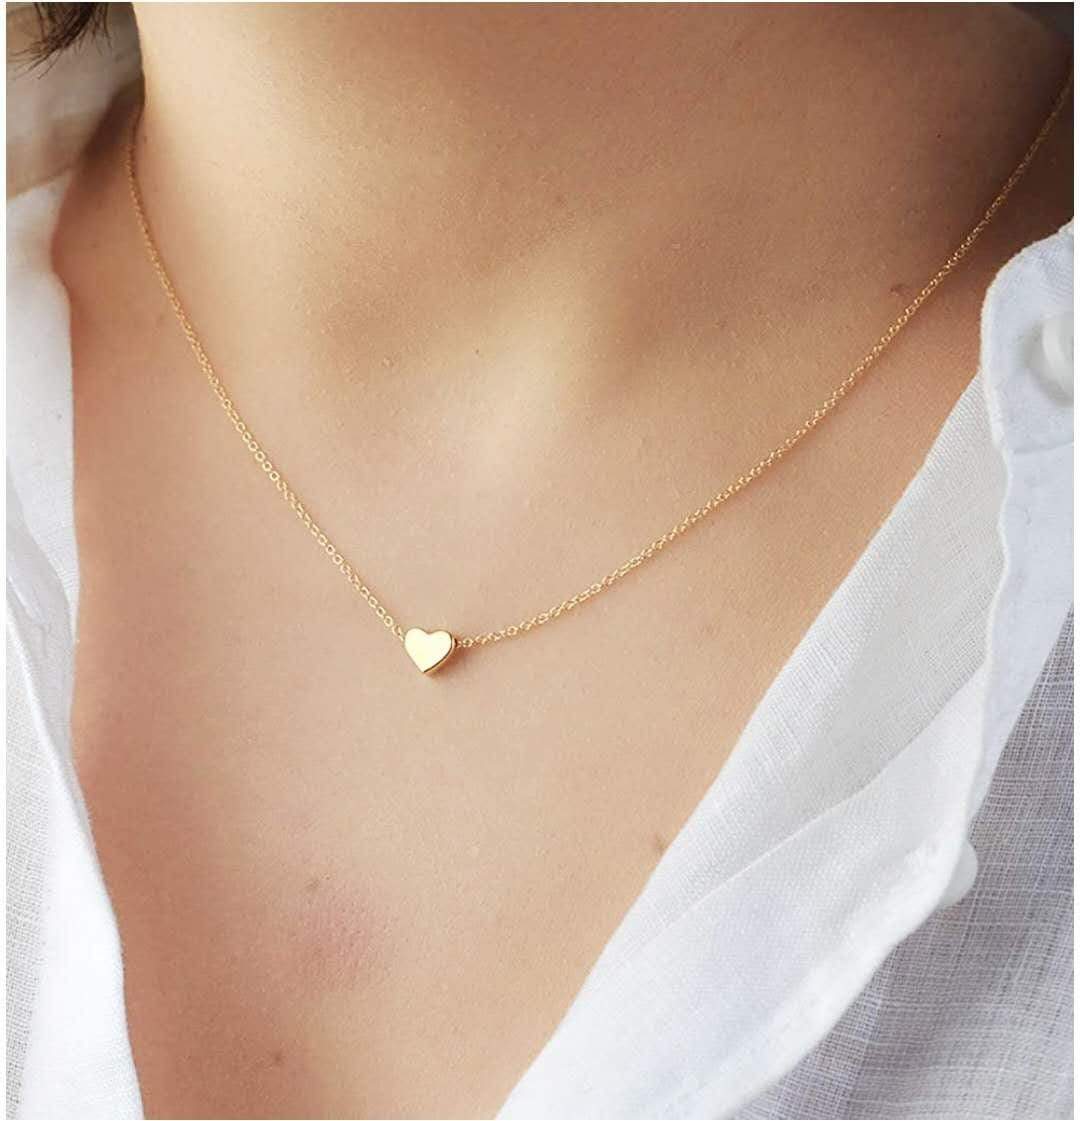 Dainty Gold Tone Heart Necklace - Initial Heart Charm Necklace - Tiny Heart Pendant Necklace - ArtGalleryZen